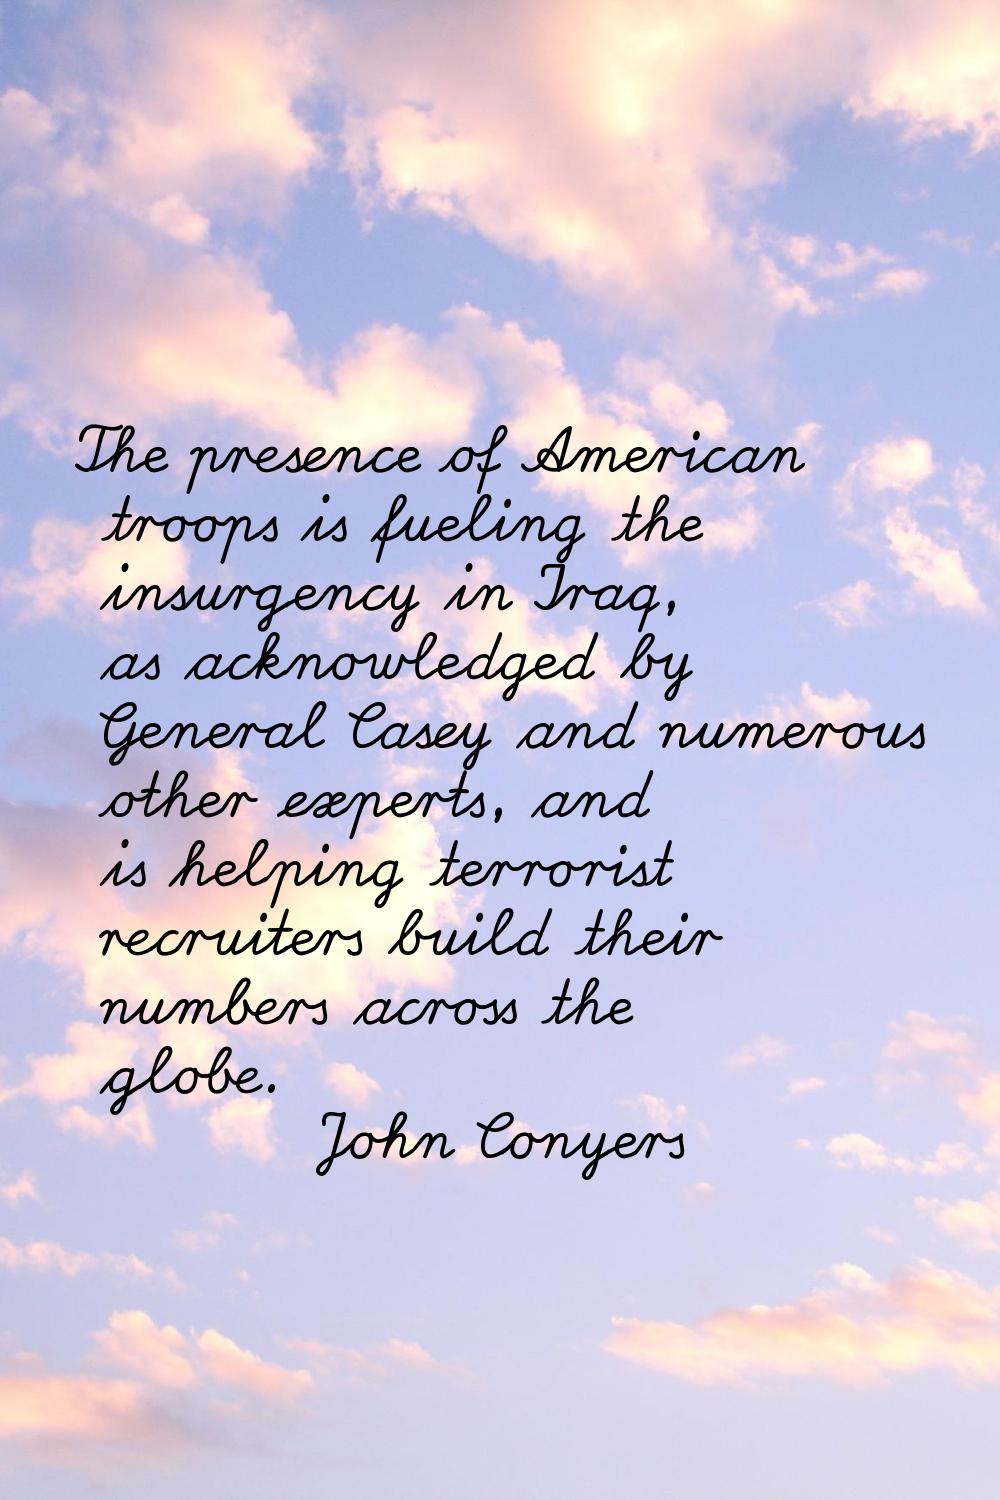 The presence of American troops is fueling the insurgency in Iraq, as acknowledged by General Casey